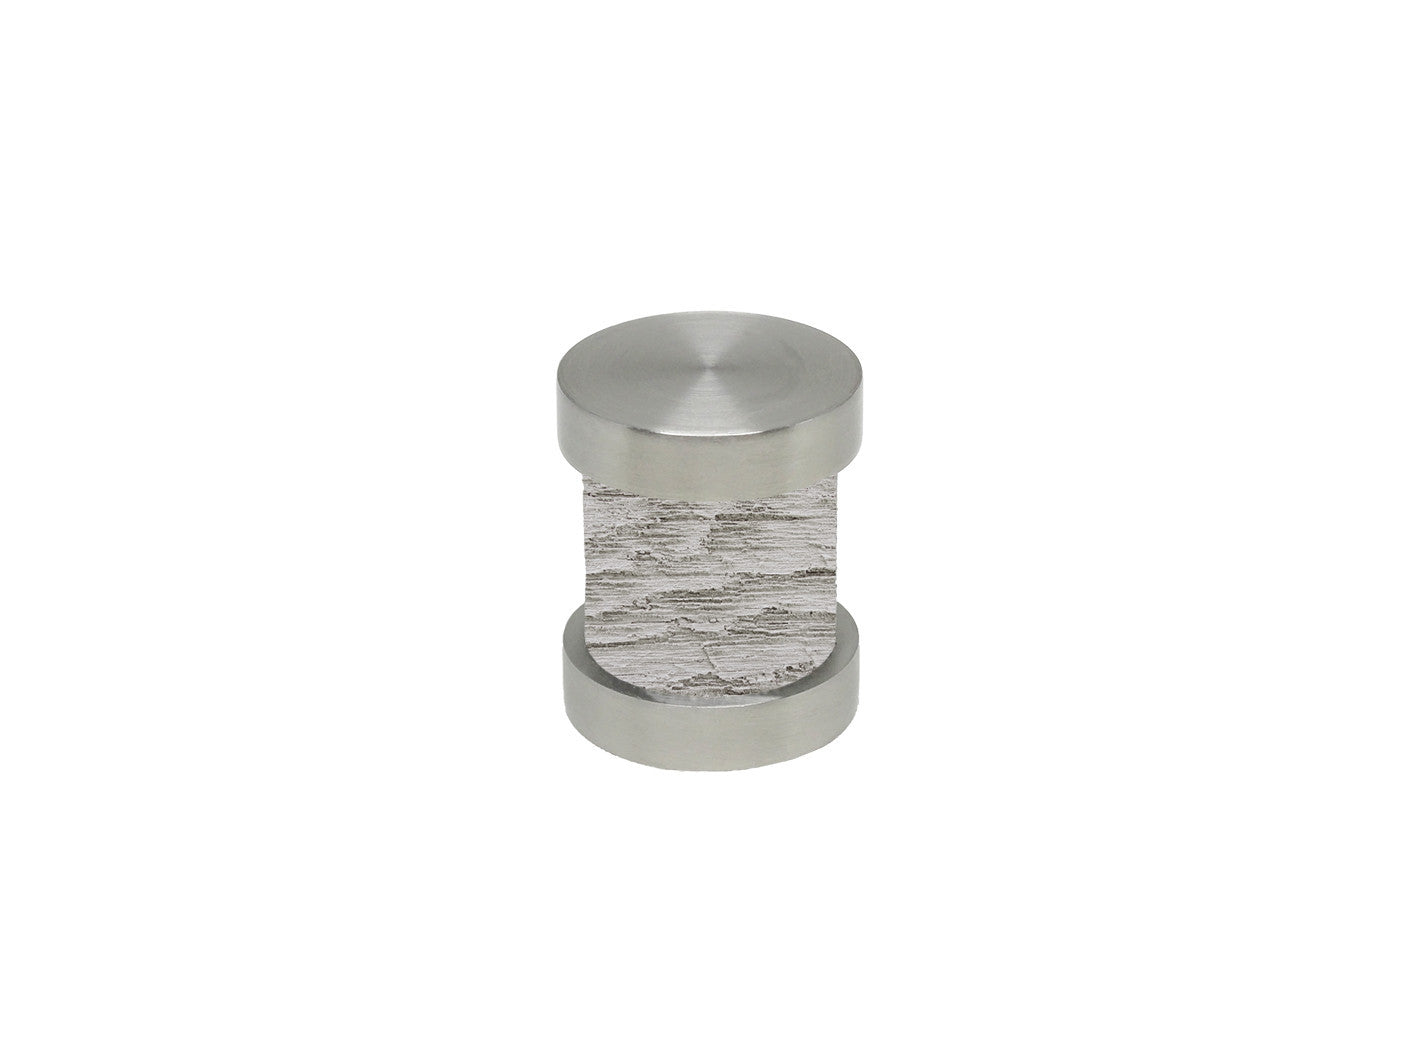 Pumice grey groove finial | Walcot House 30mm stainless steel collection